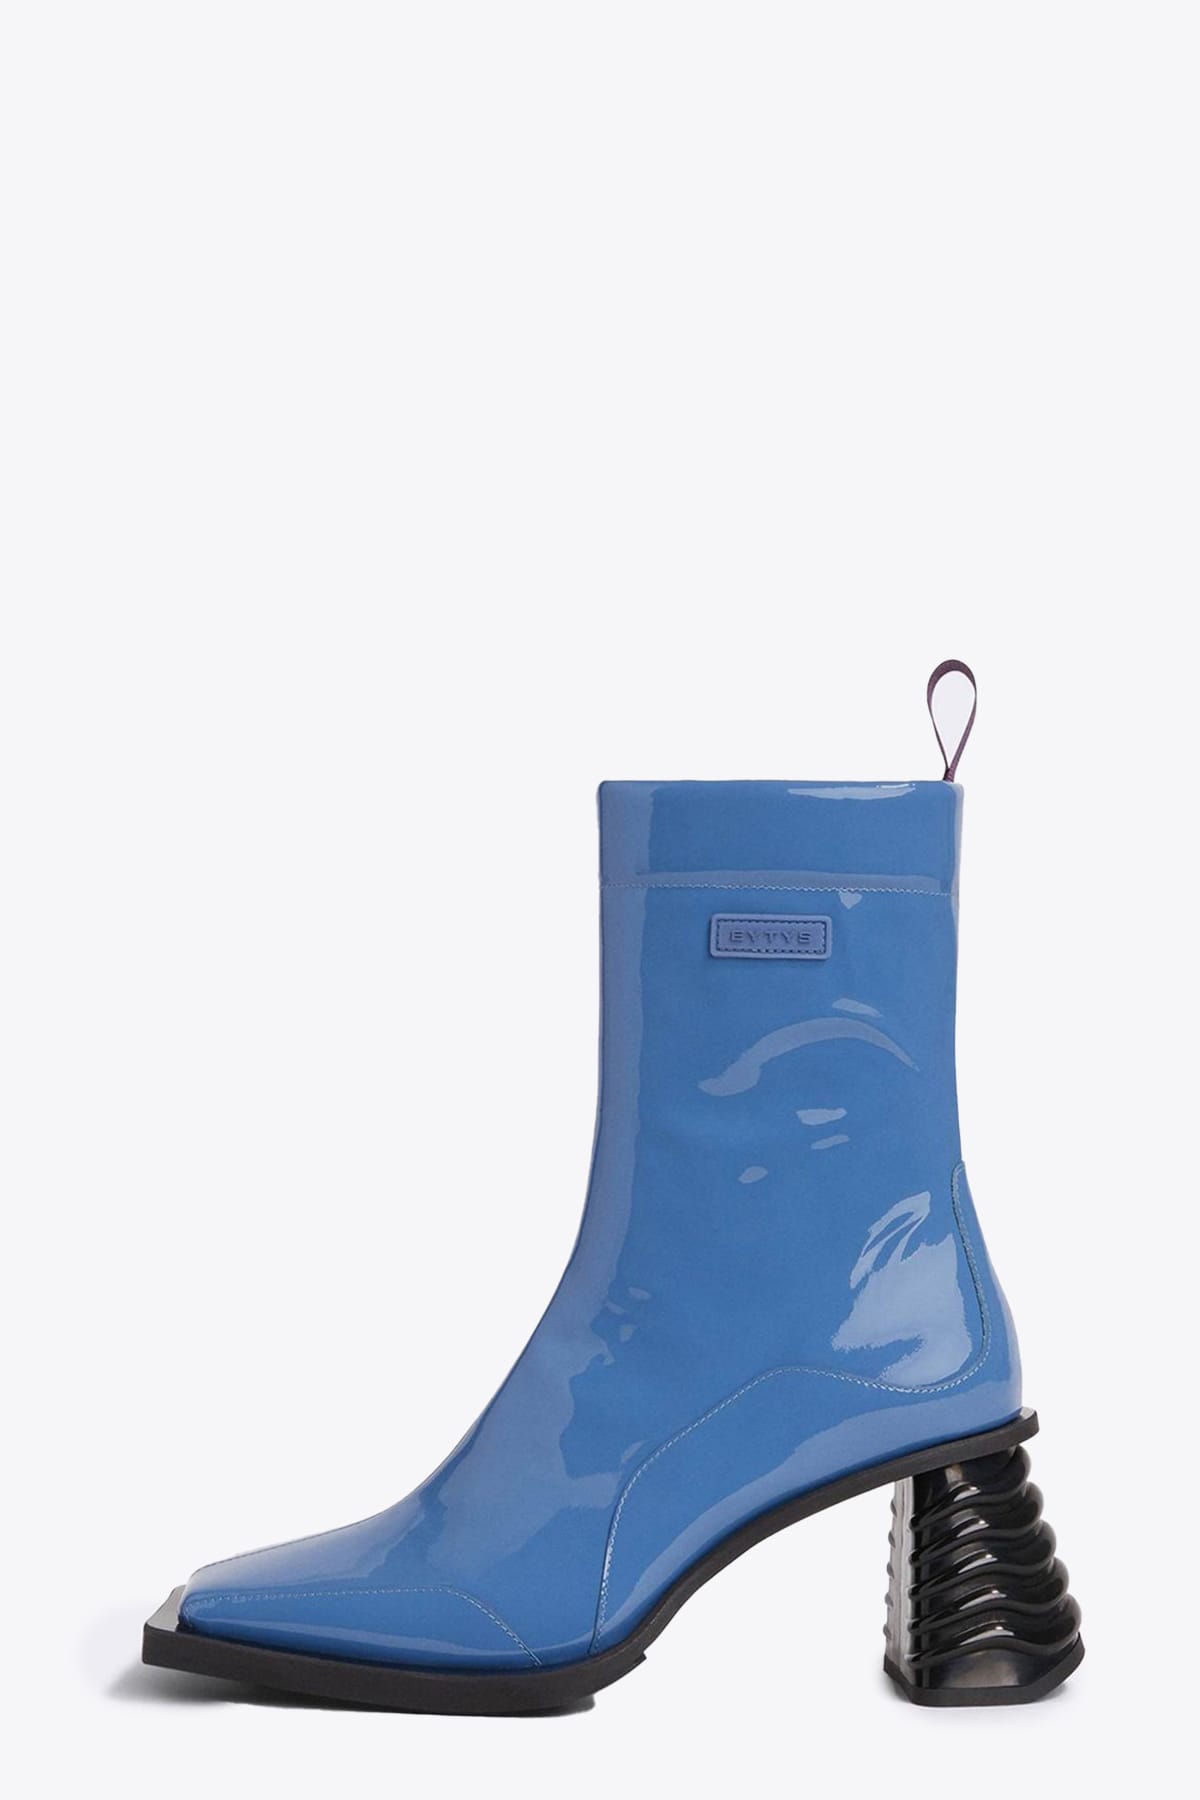 Eytys Gaia Astro Blue patent leather heeled ankle boots - GAIA ASTRO